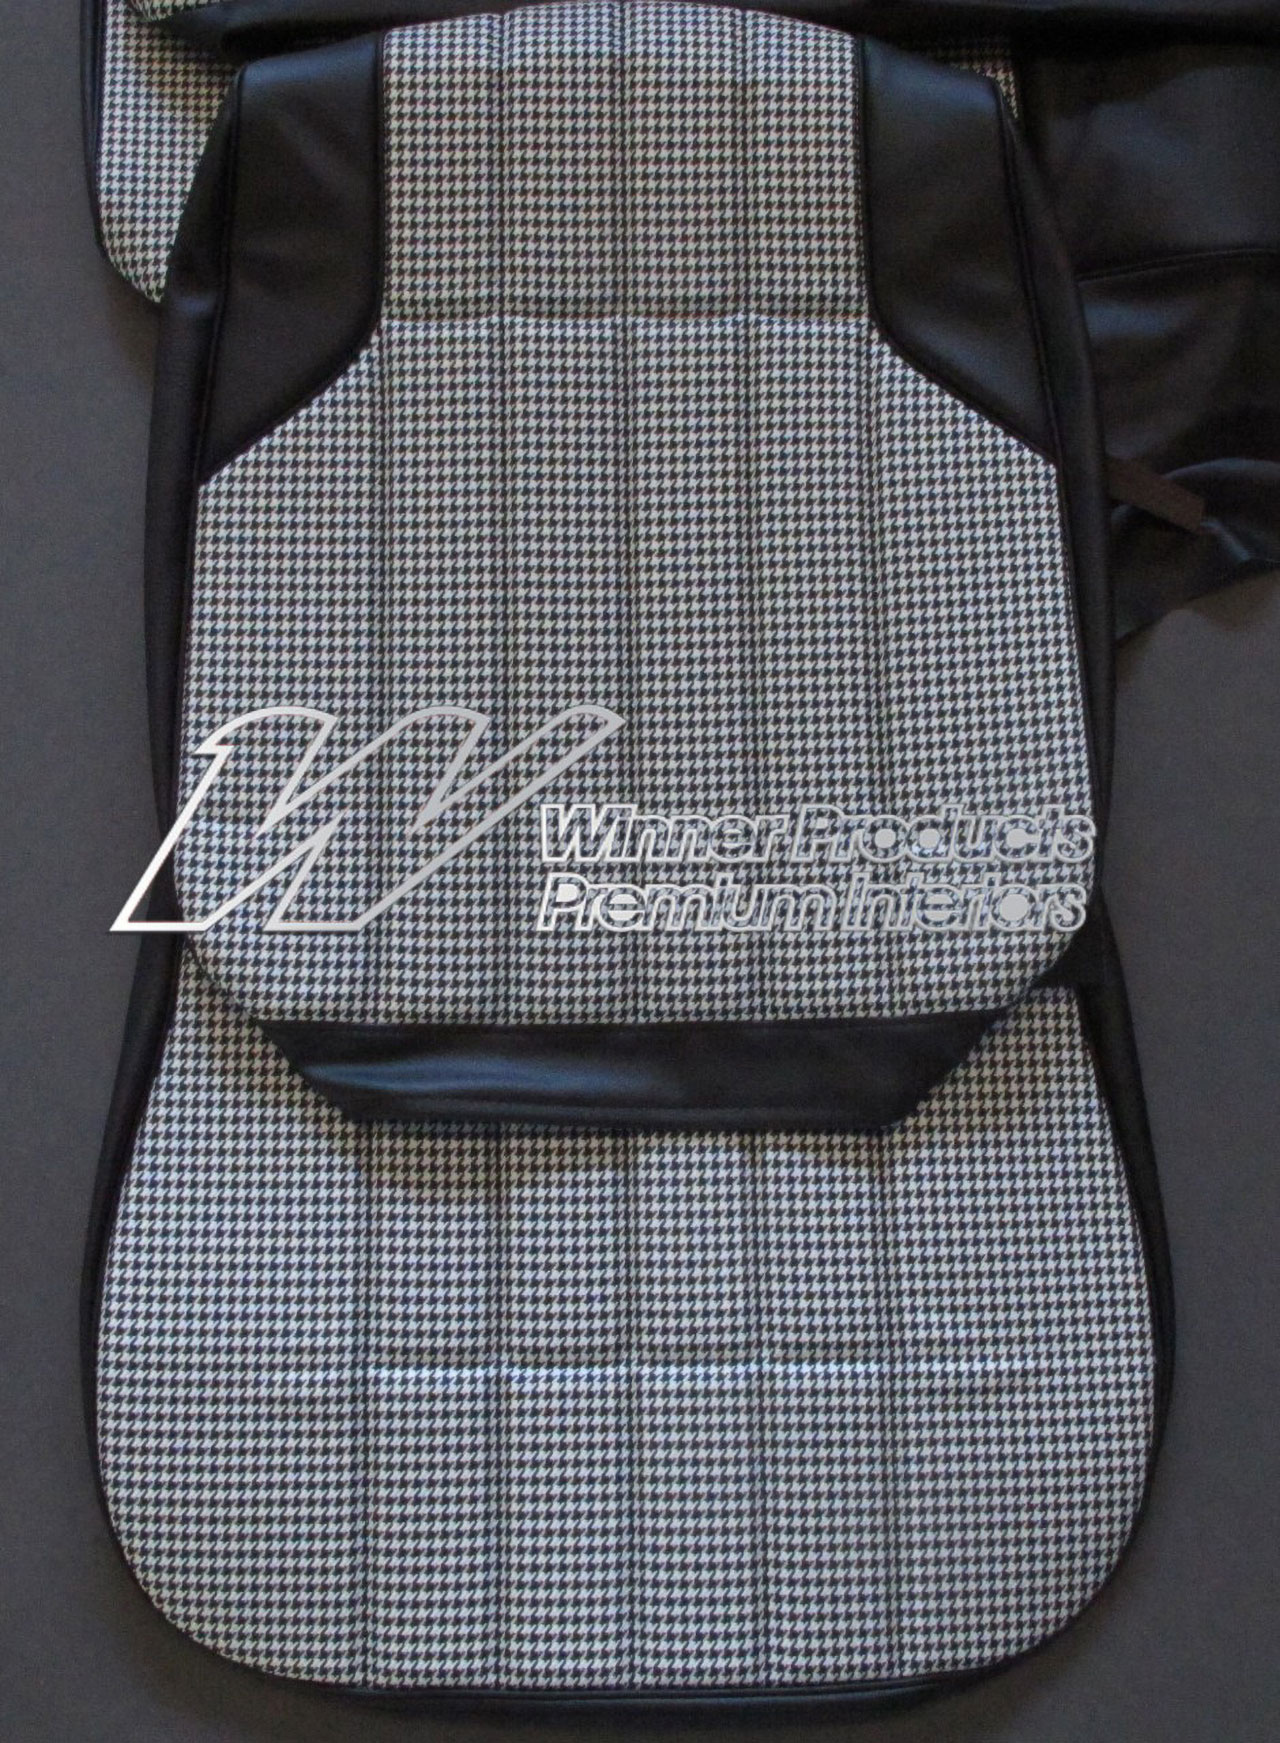 Holden Monaro HT Monaro GTS Coupe 10Y Black & Houndstooth Seat Covers (Image 2 of 4)